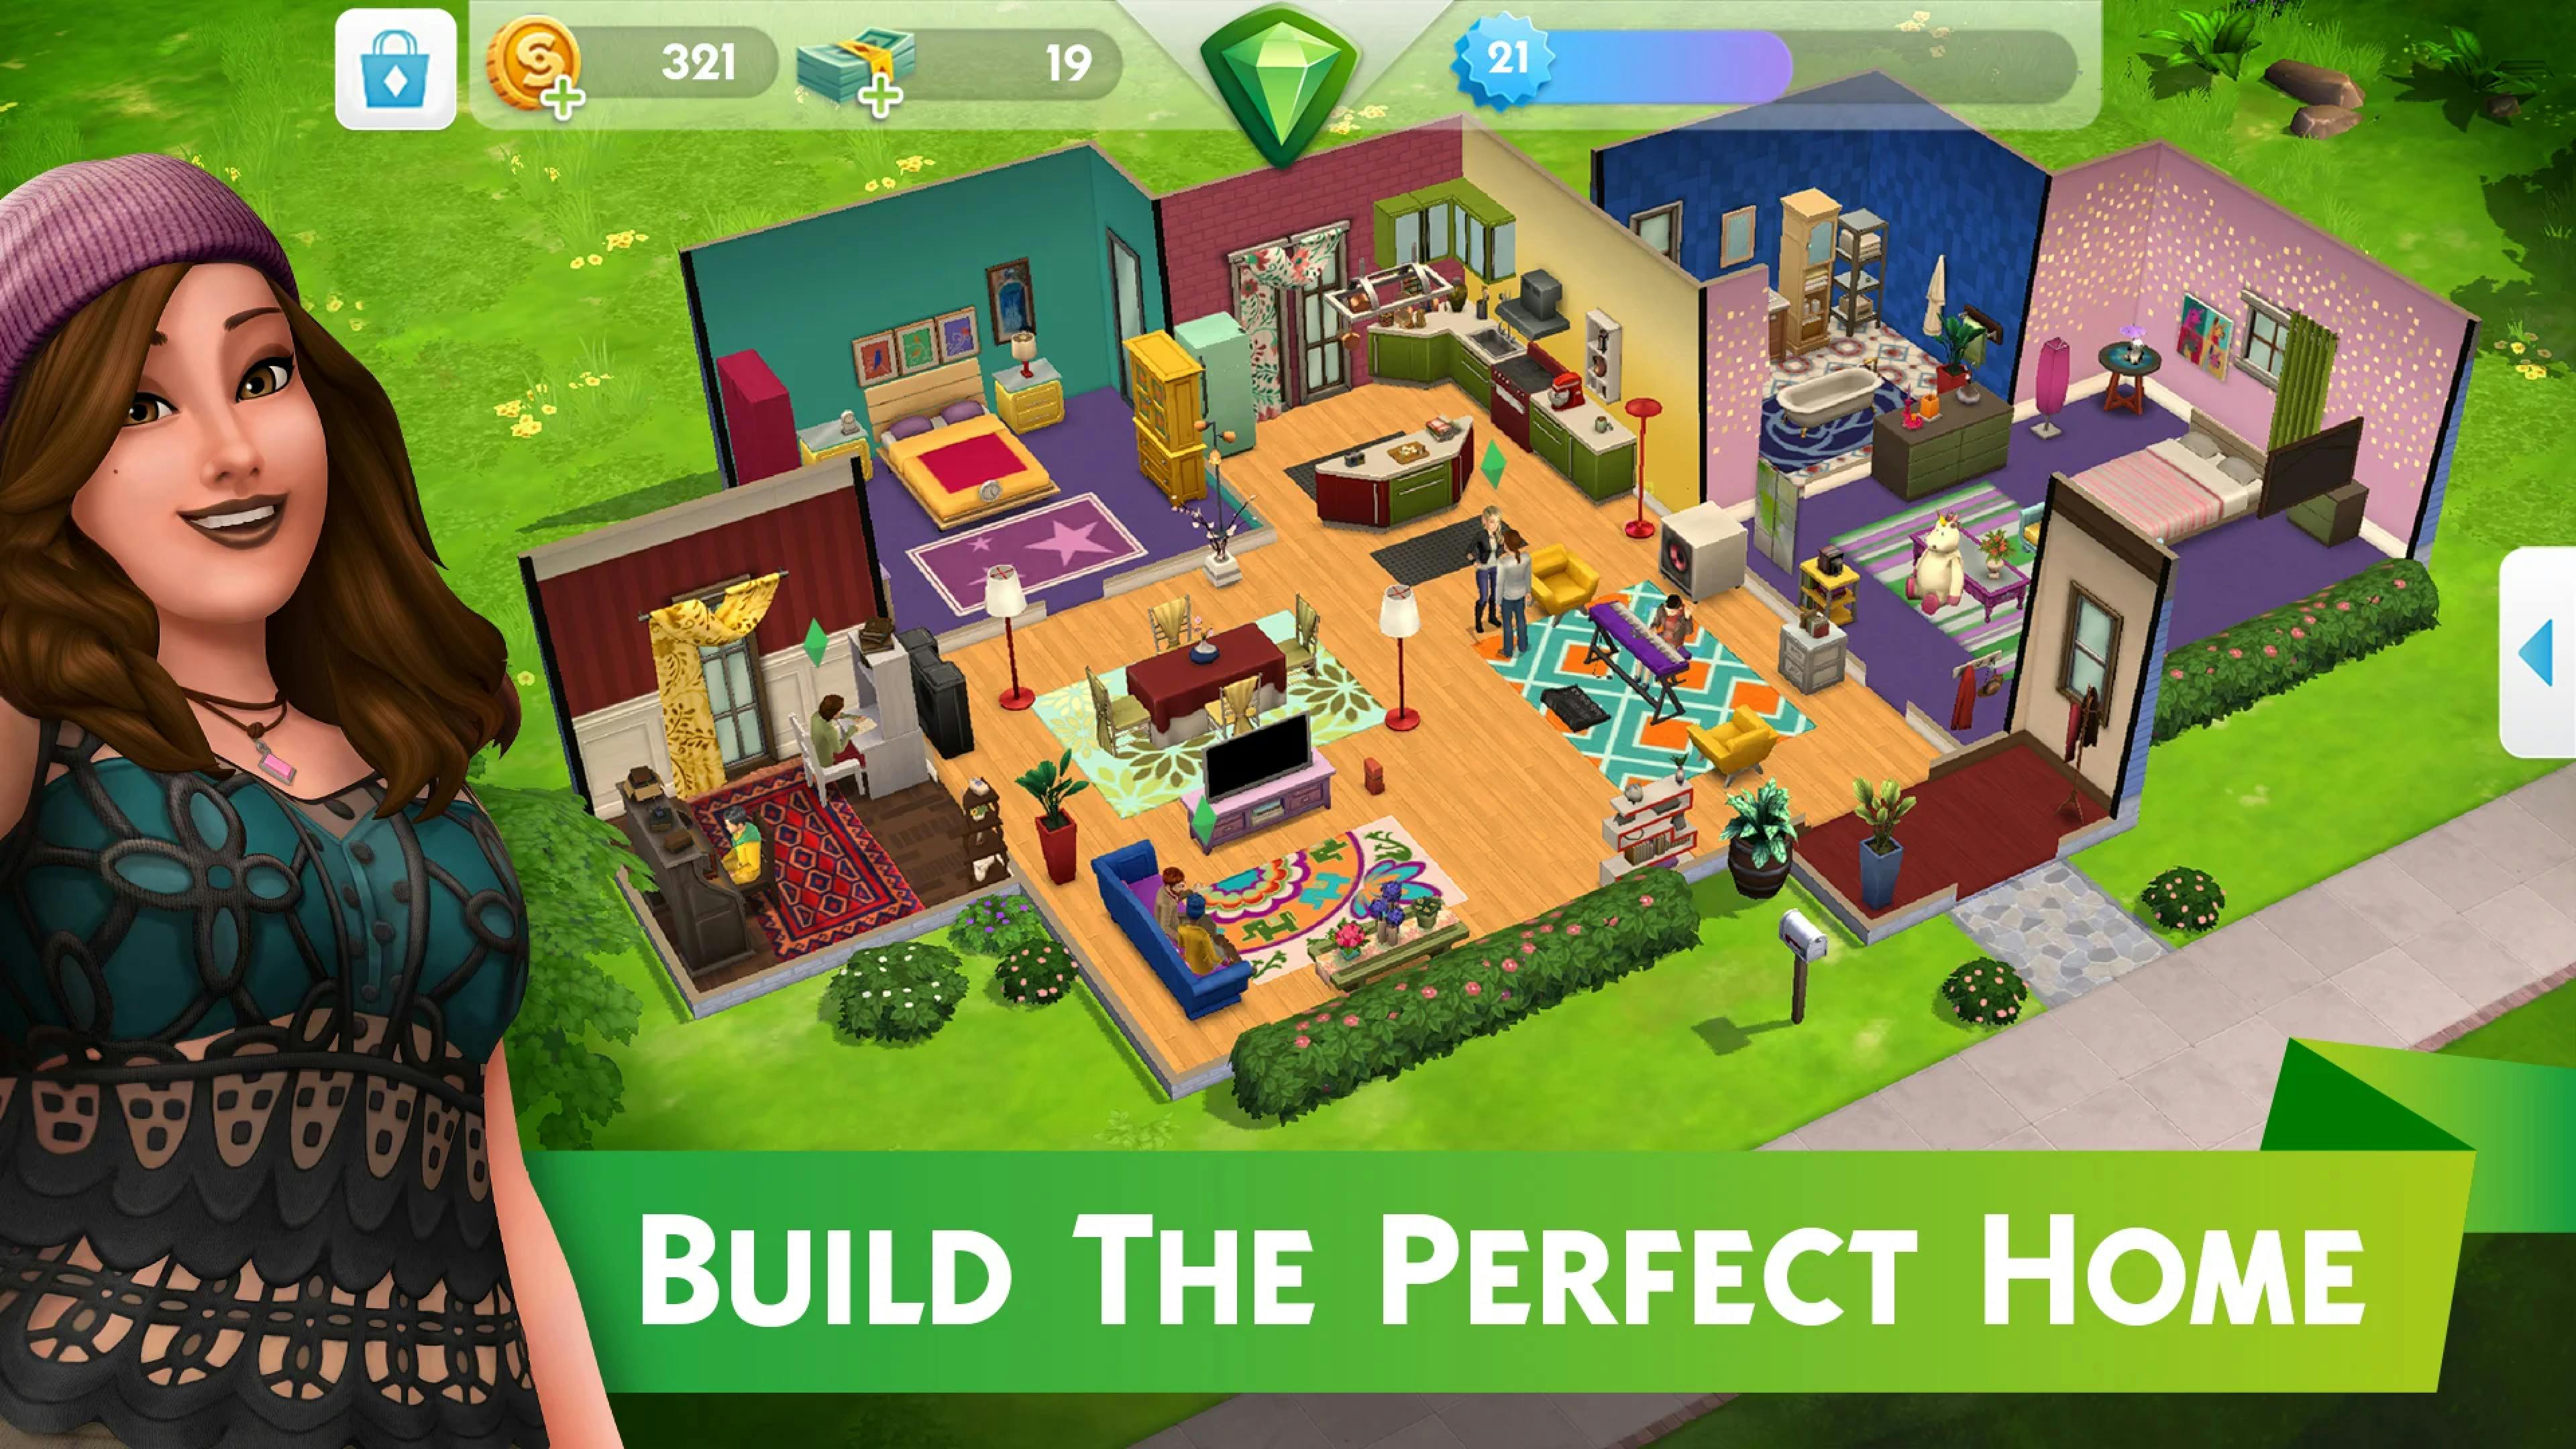 The Sims Mobile App game